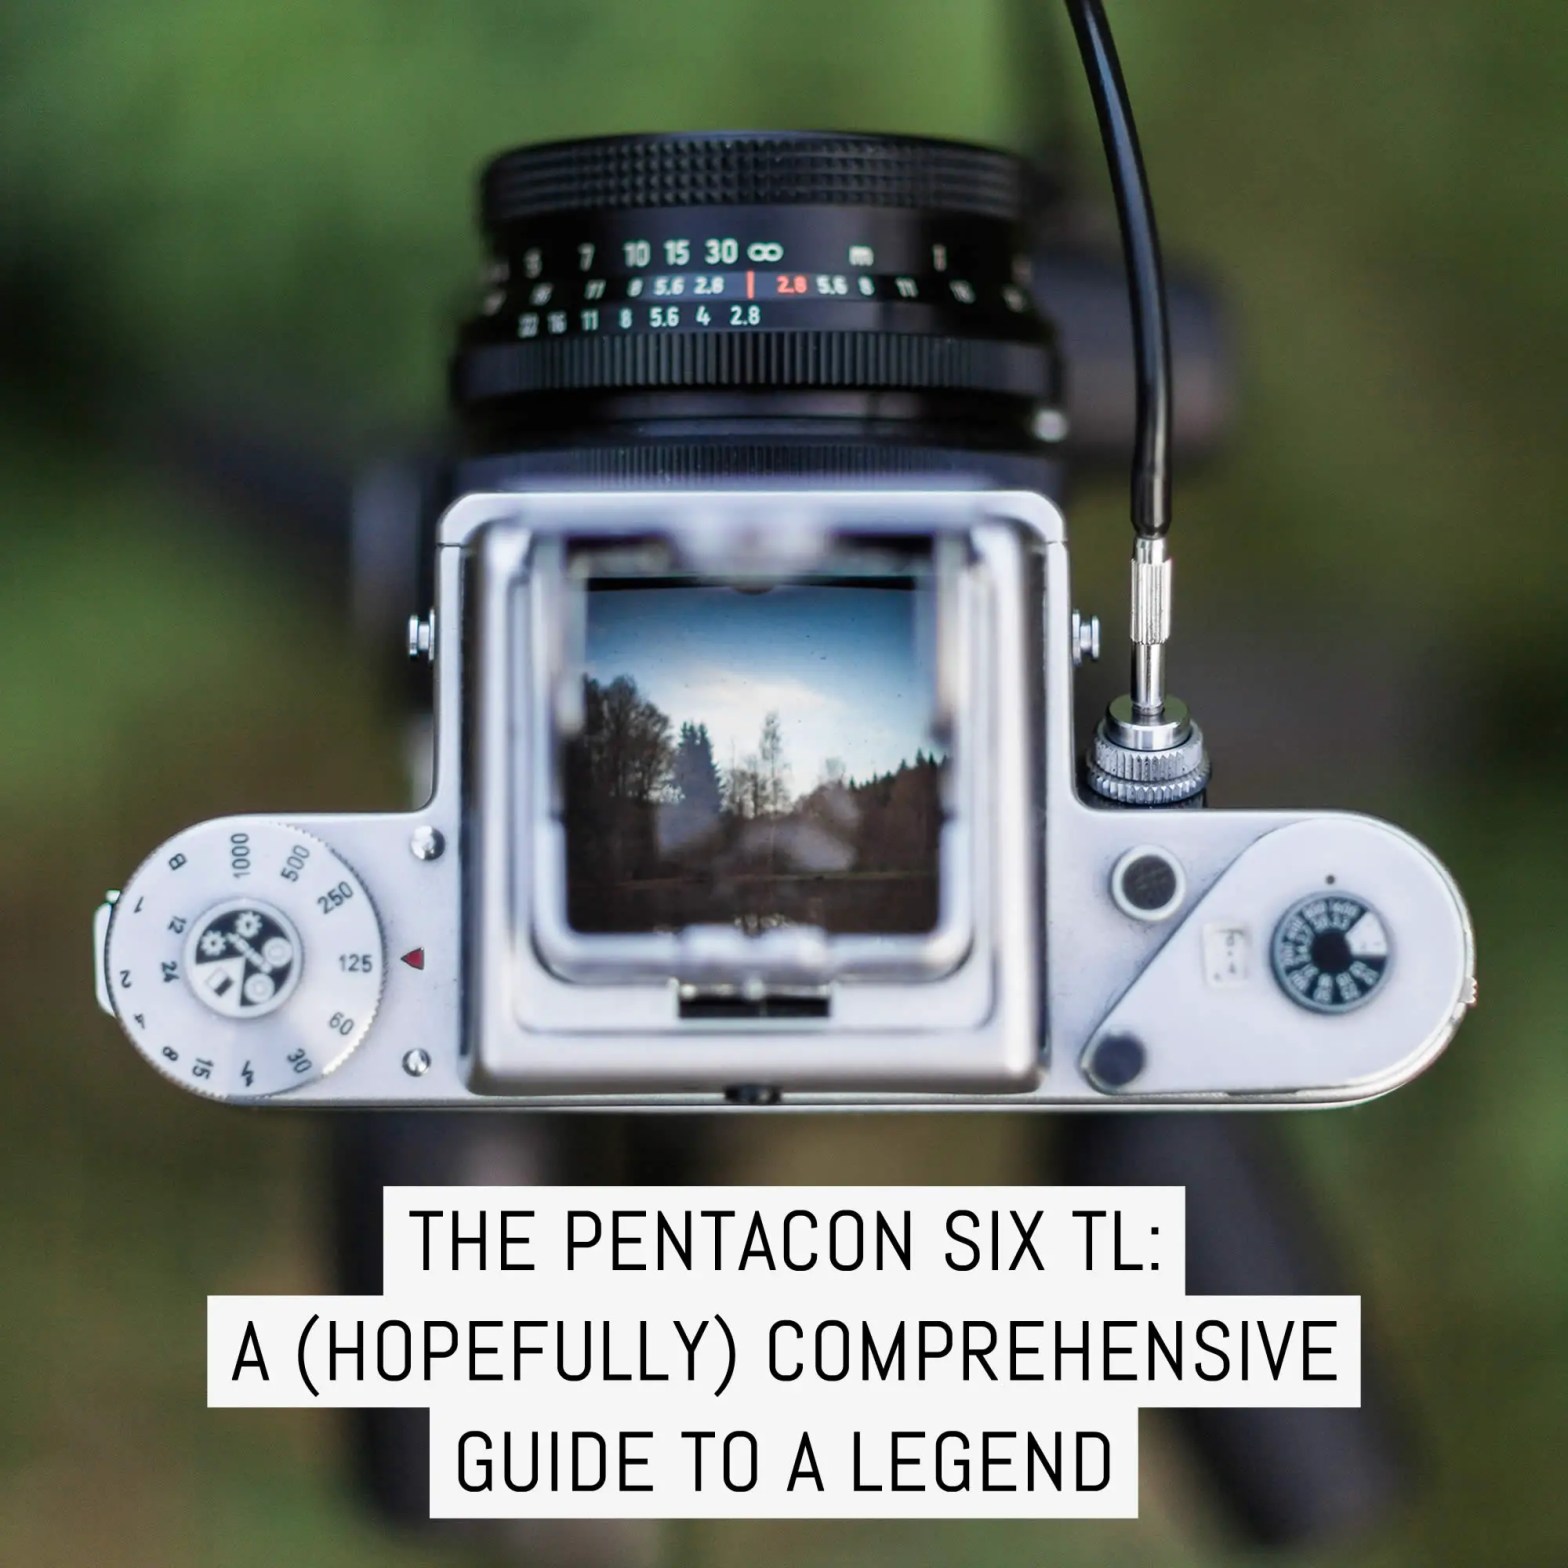 Camera review: The Pentacon Six TL, a (hopefully) comprehensive guide to a legend